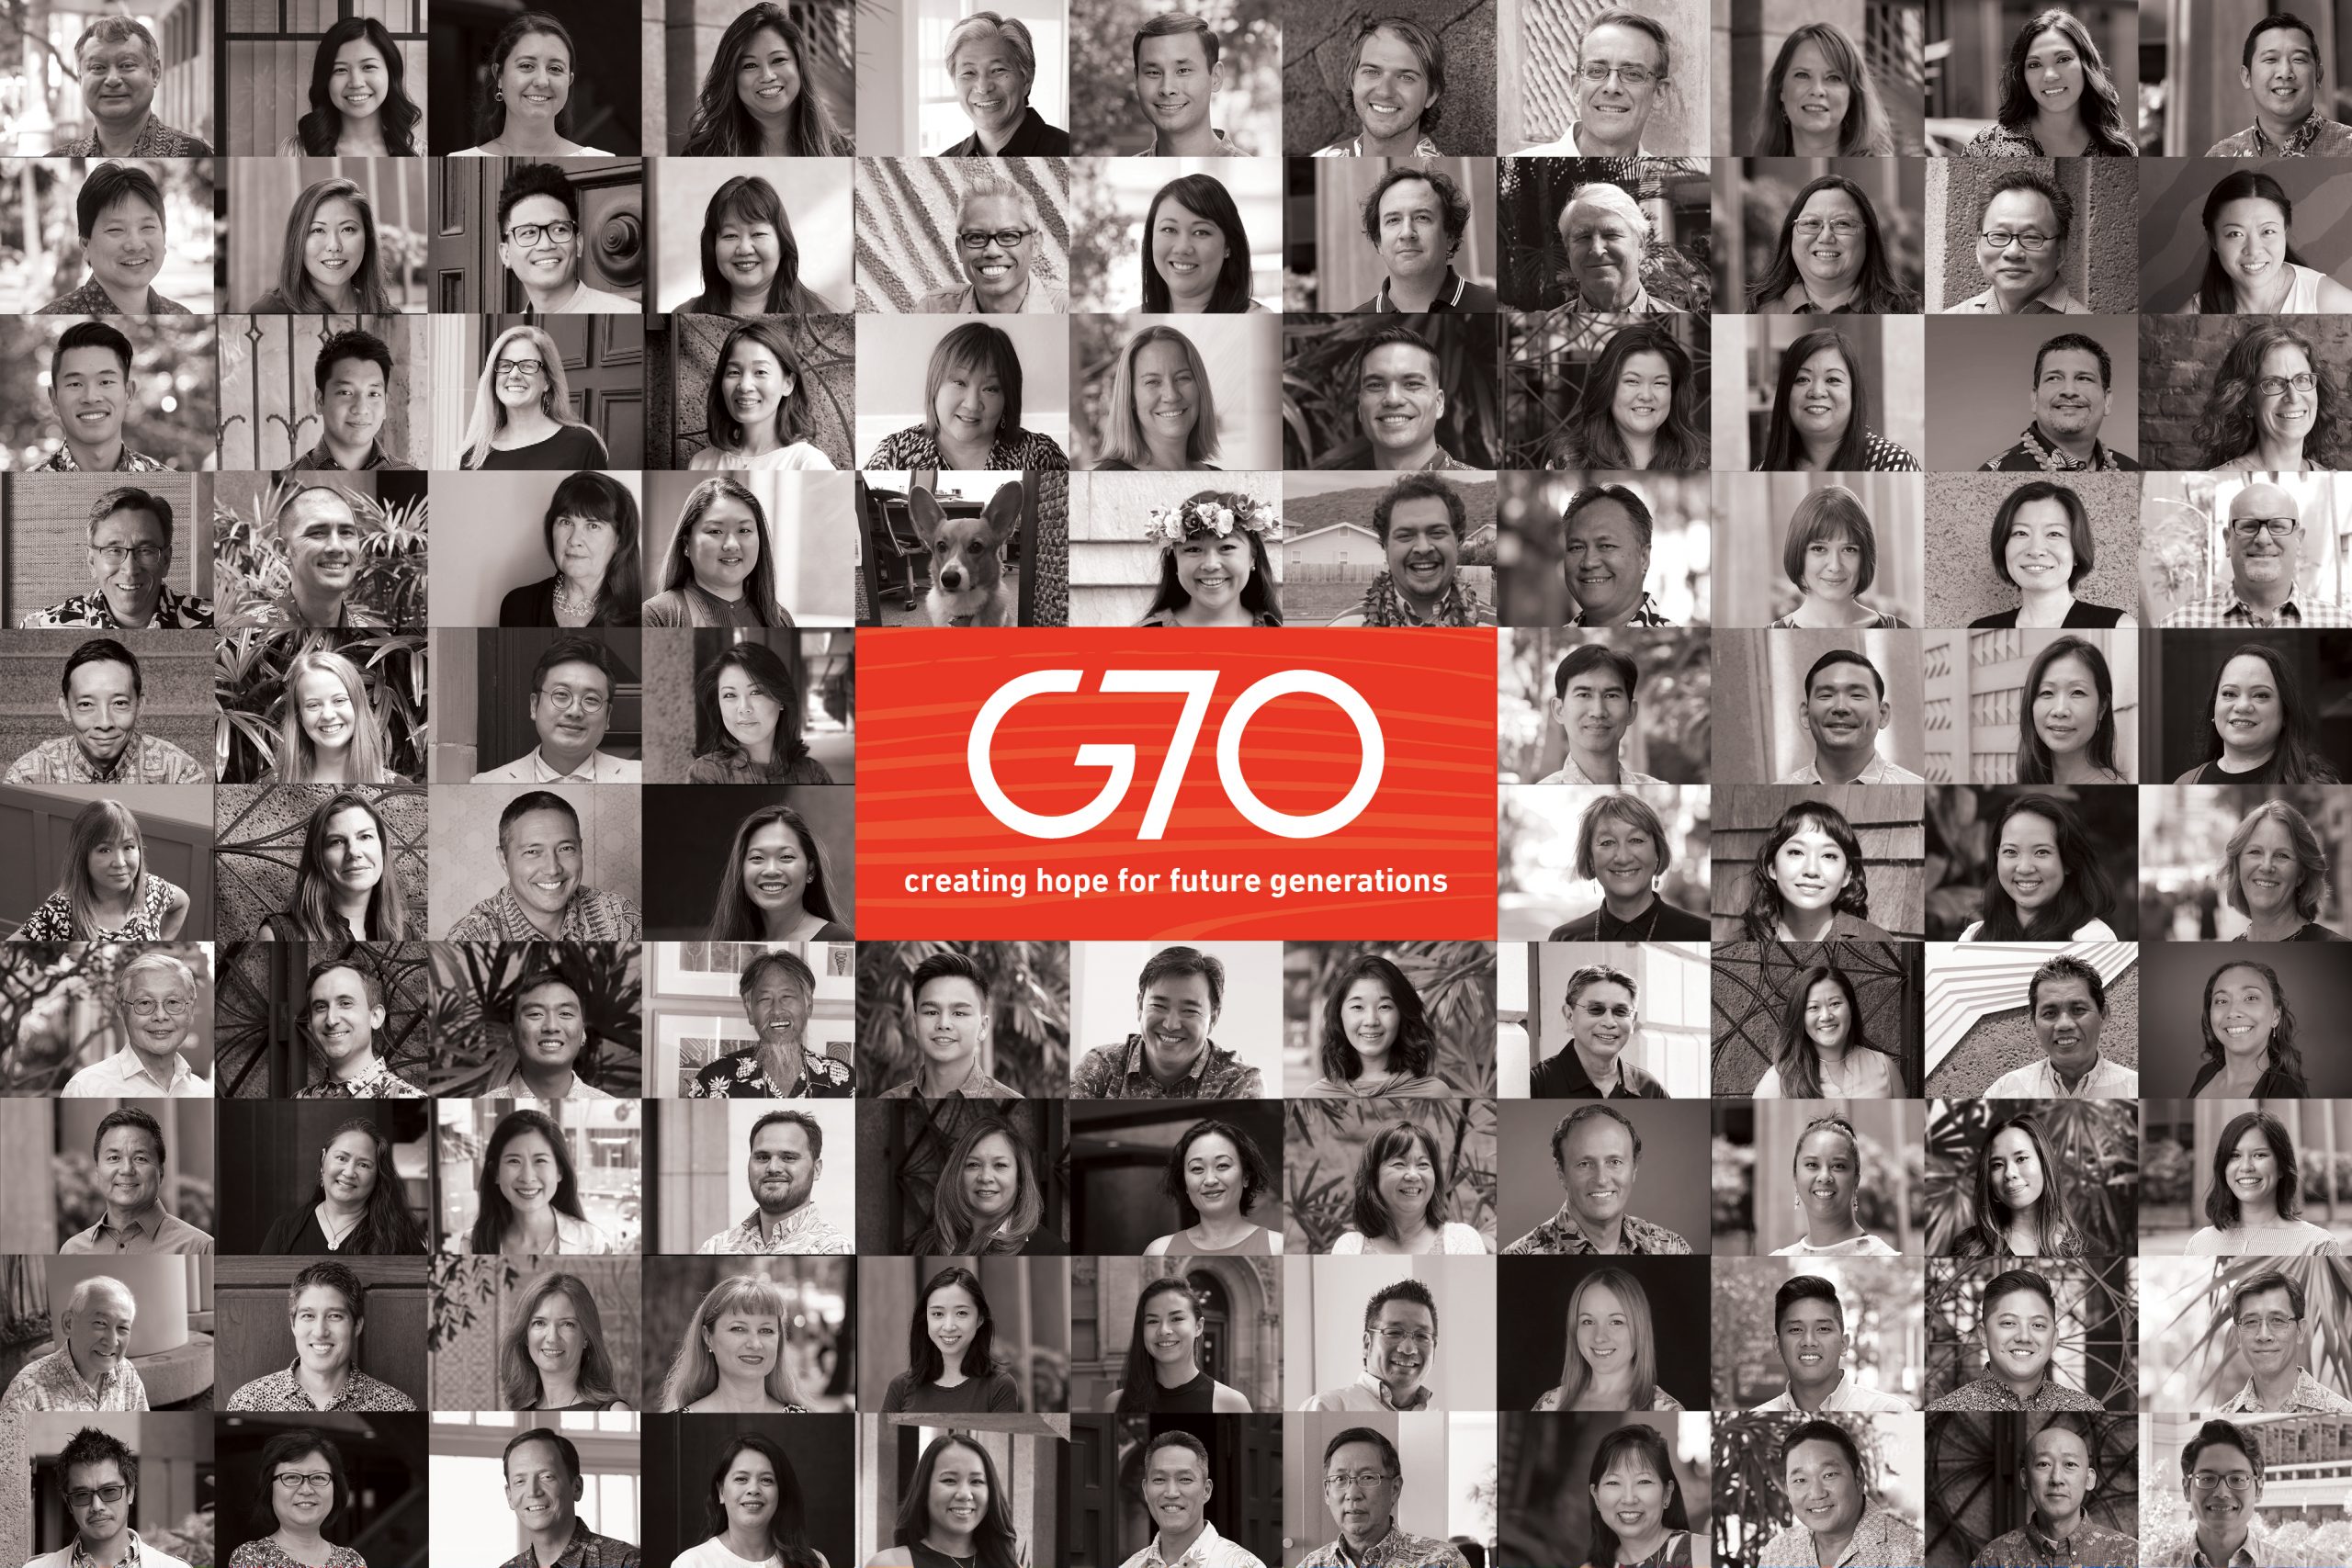 Finding Purpose at Work | G70 Office Culture